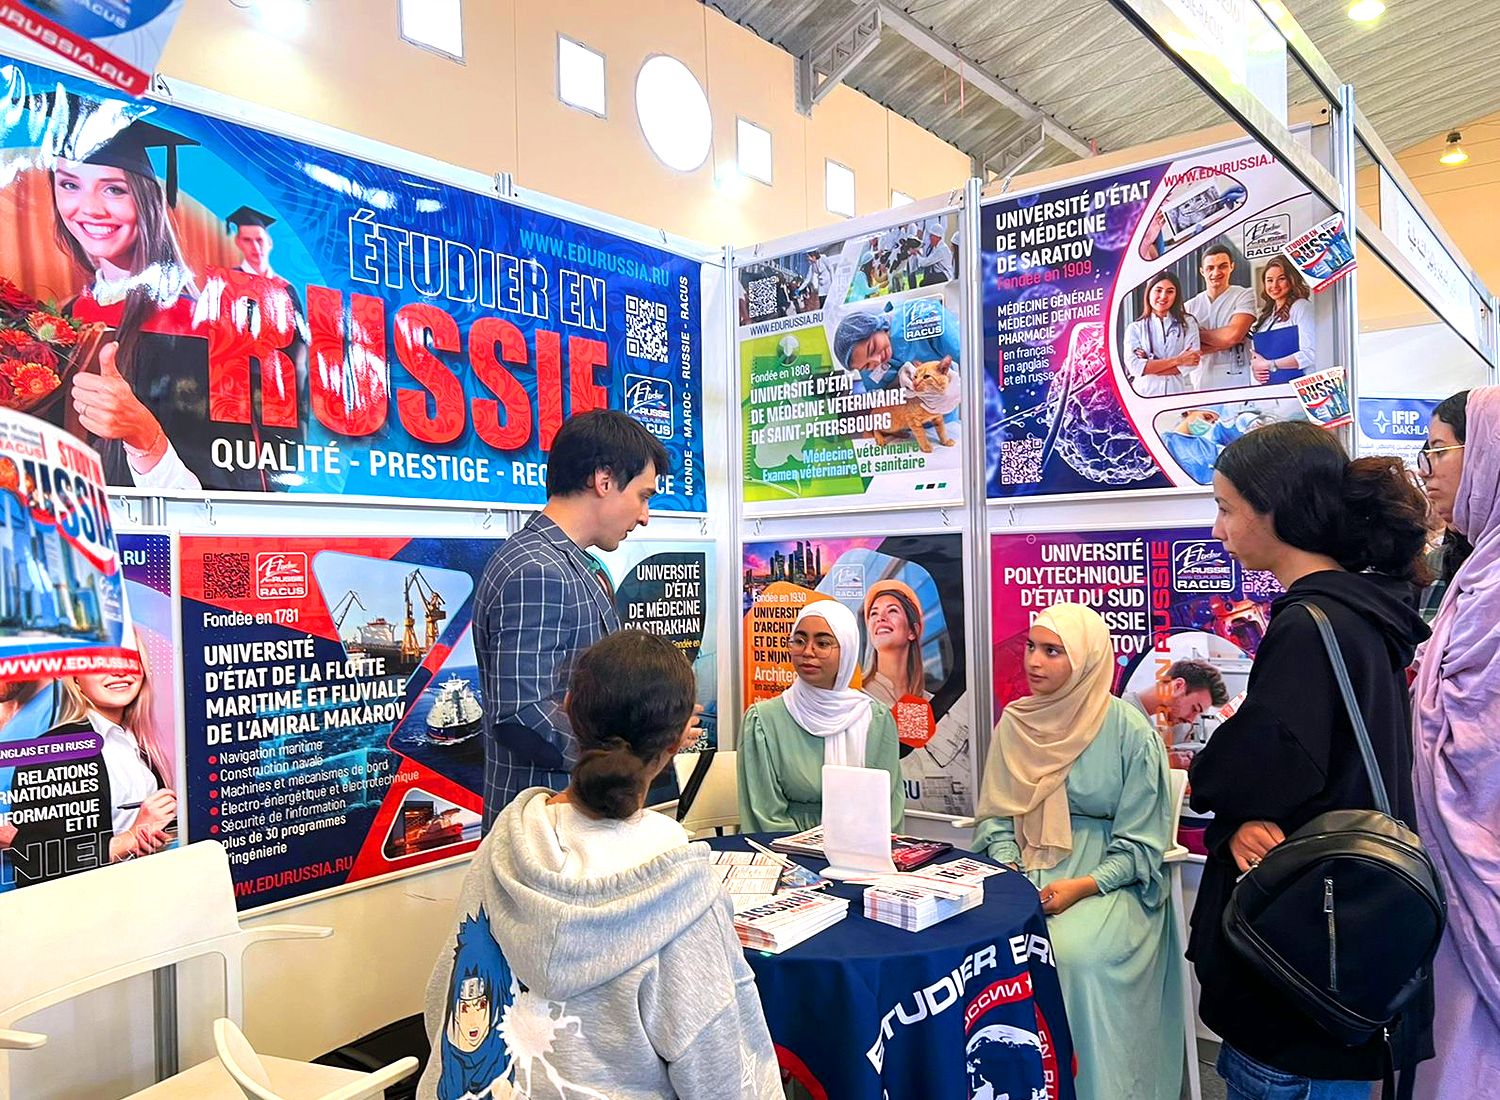 The following Russian universities that are recognized and popular in the Kingdom of Morocco were the most interesting for students and parents at the exhibitions: Saint Petersburg State Chemical Pharmaceutical University, Astrakhan State Medical University, Tambov State University, Perm State Pharmaceutical Academy, Saratov State Medical University, Saint Petersburg State University of Veterinary Medicine, South Russian State Polytechnic University. The biomedical and engineering programs in French and English medium of instruction were especially popular among the visitors of the exhibitions.